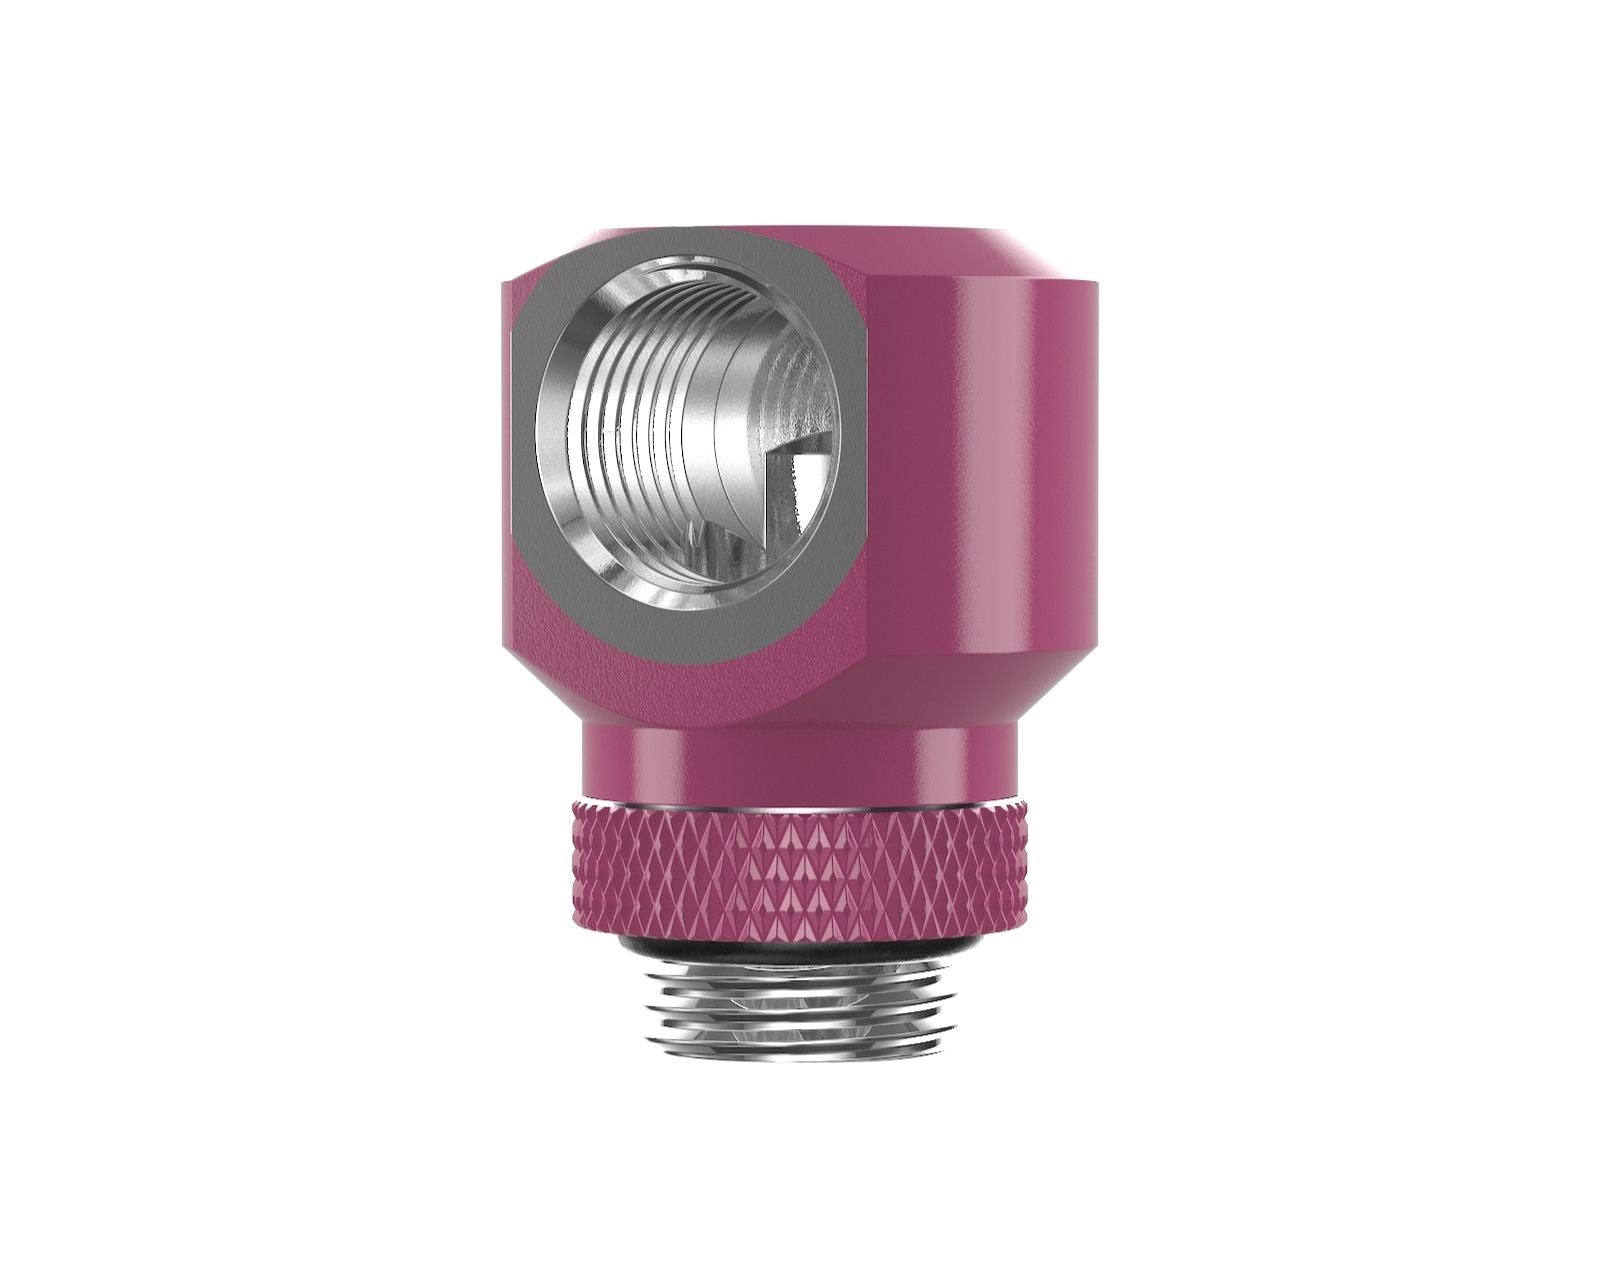 PrimoChill InterConnectSX Flat 90 Degree Rotary Fitting (FAF90) – Enhanced PC Cooling with Sleek Aesthetics - Available in 20+ Colors, Custom Watercooling Loop Ready - Magenta